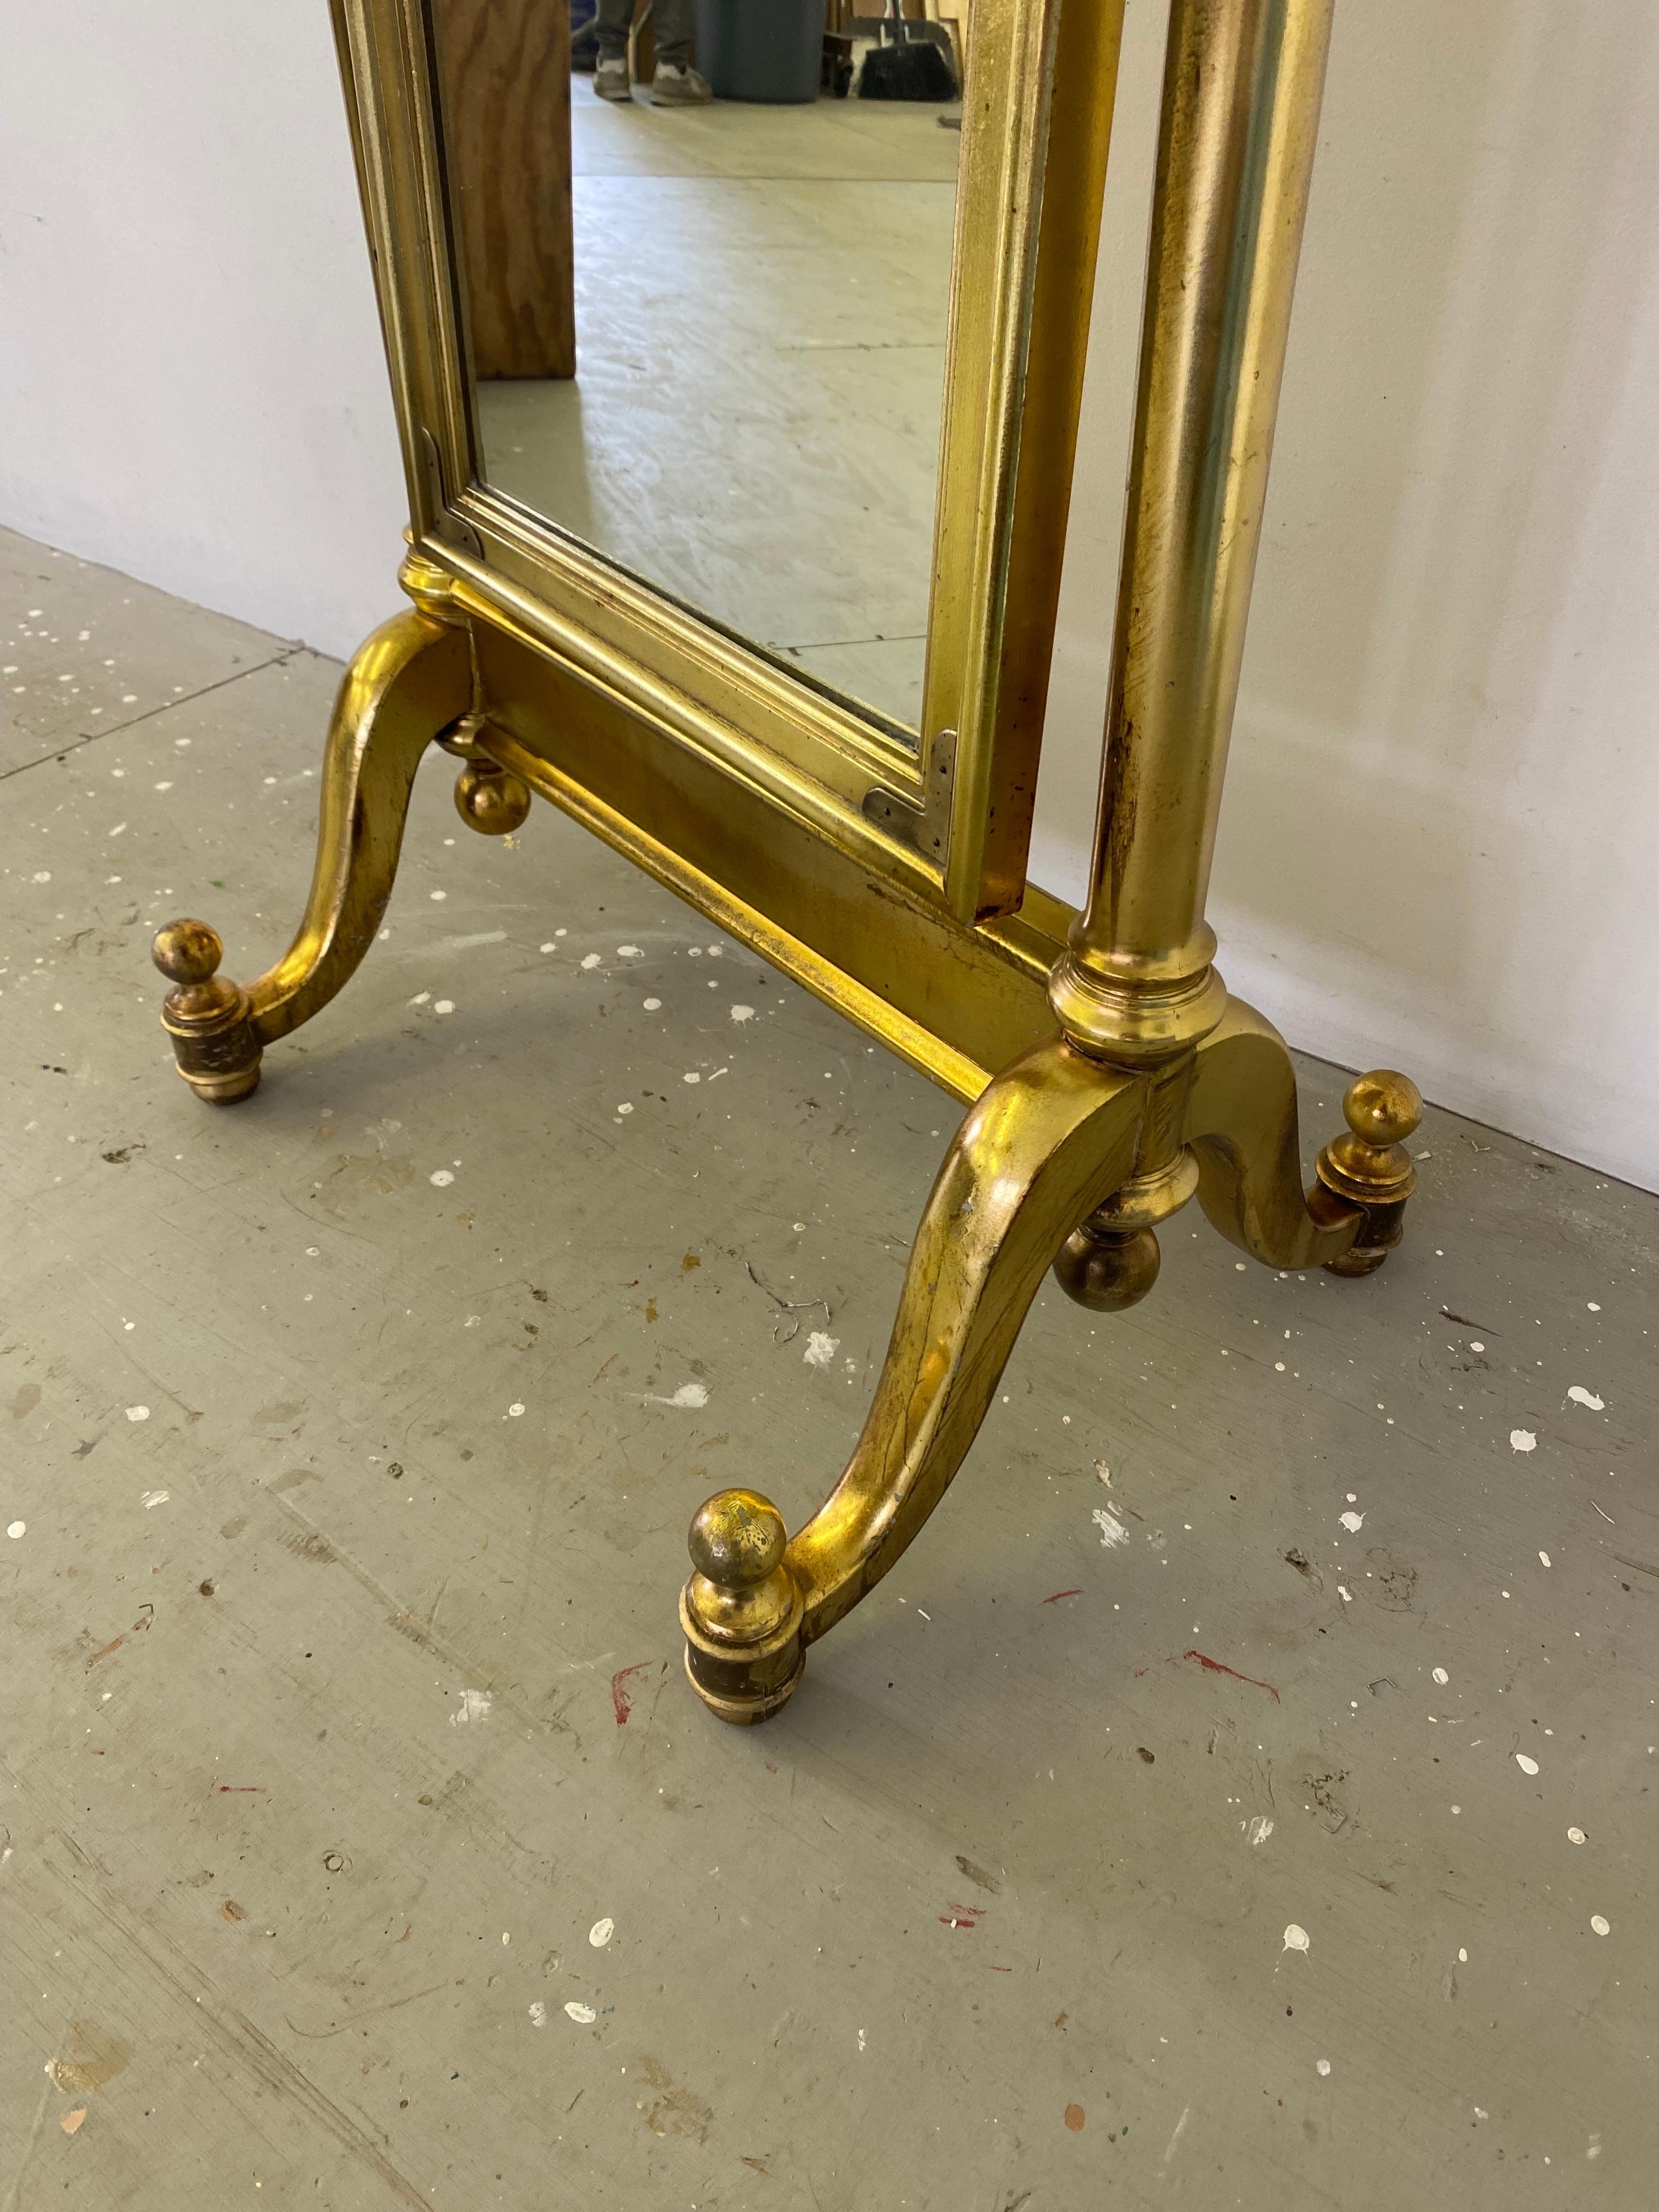 Gilt Cheval Mirror. Dates to the 1970's with Brass Campaign Style Brackets in the Corners. Has the look of Brass with a Twist! Little Gilt loss and some staining. Overall a very nice amount of Patina! Stands very Solid!.